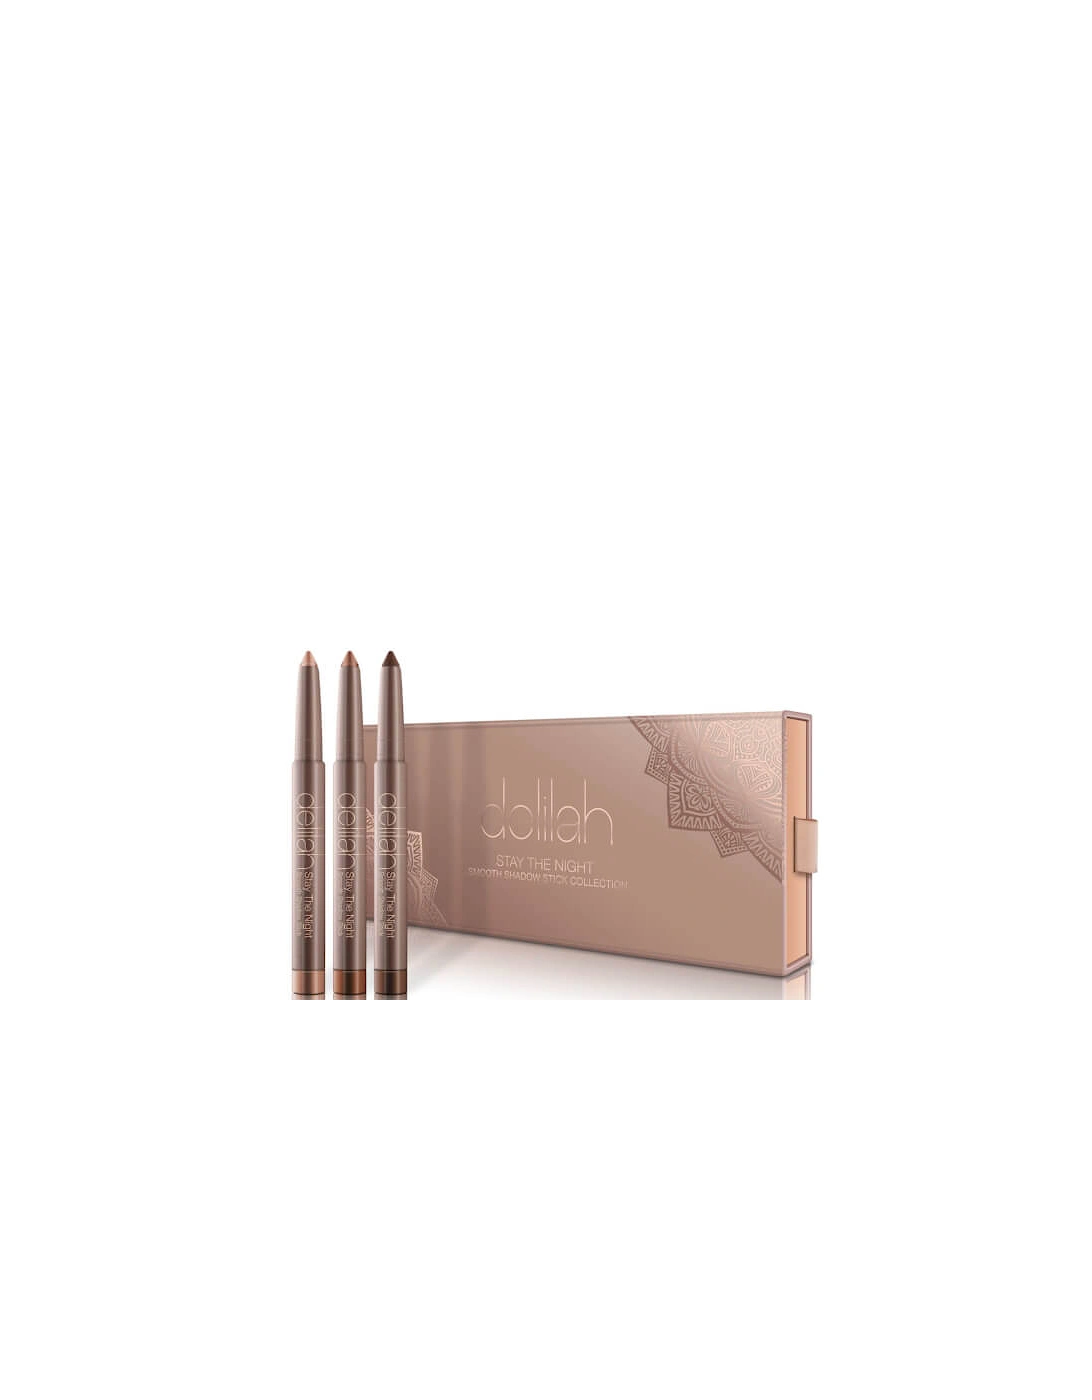 Stay The Night Smooth Shadow Stick Collection (Worth £66.00) - delilah, 2 of 1